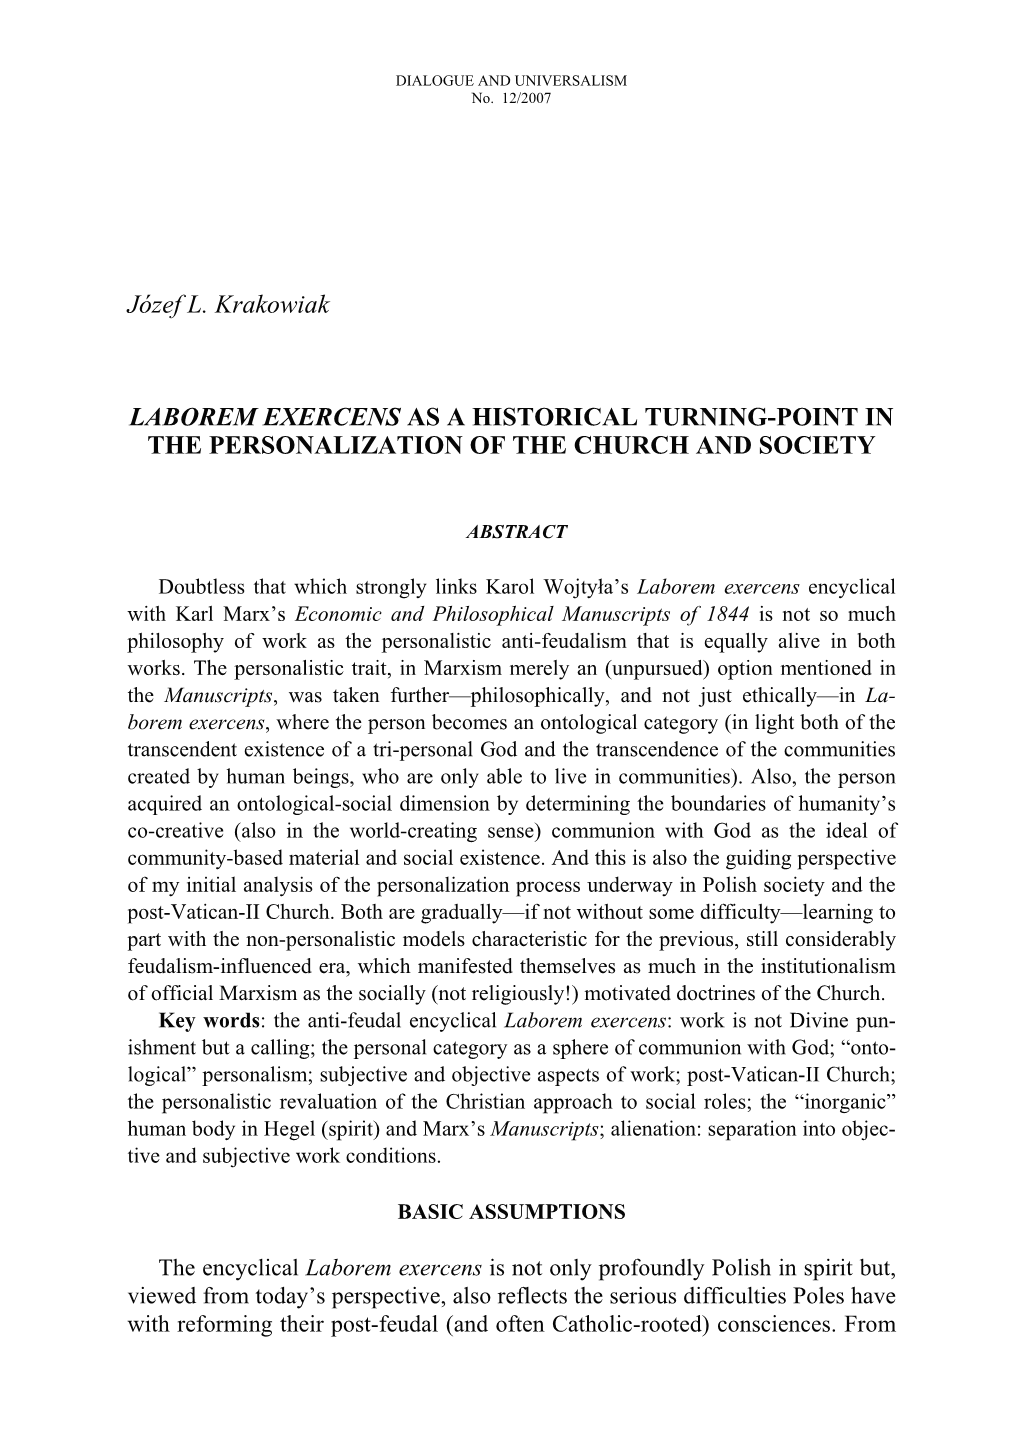 Józef L. Krakowiak LABOREM EXERCENS AS a HISTORICAL TURNING-POINT in the PERSONALIZATION of the CHURCH and SOCIETY